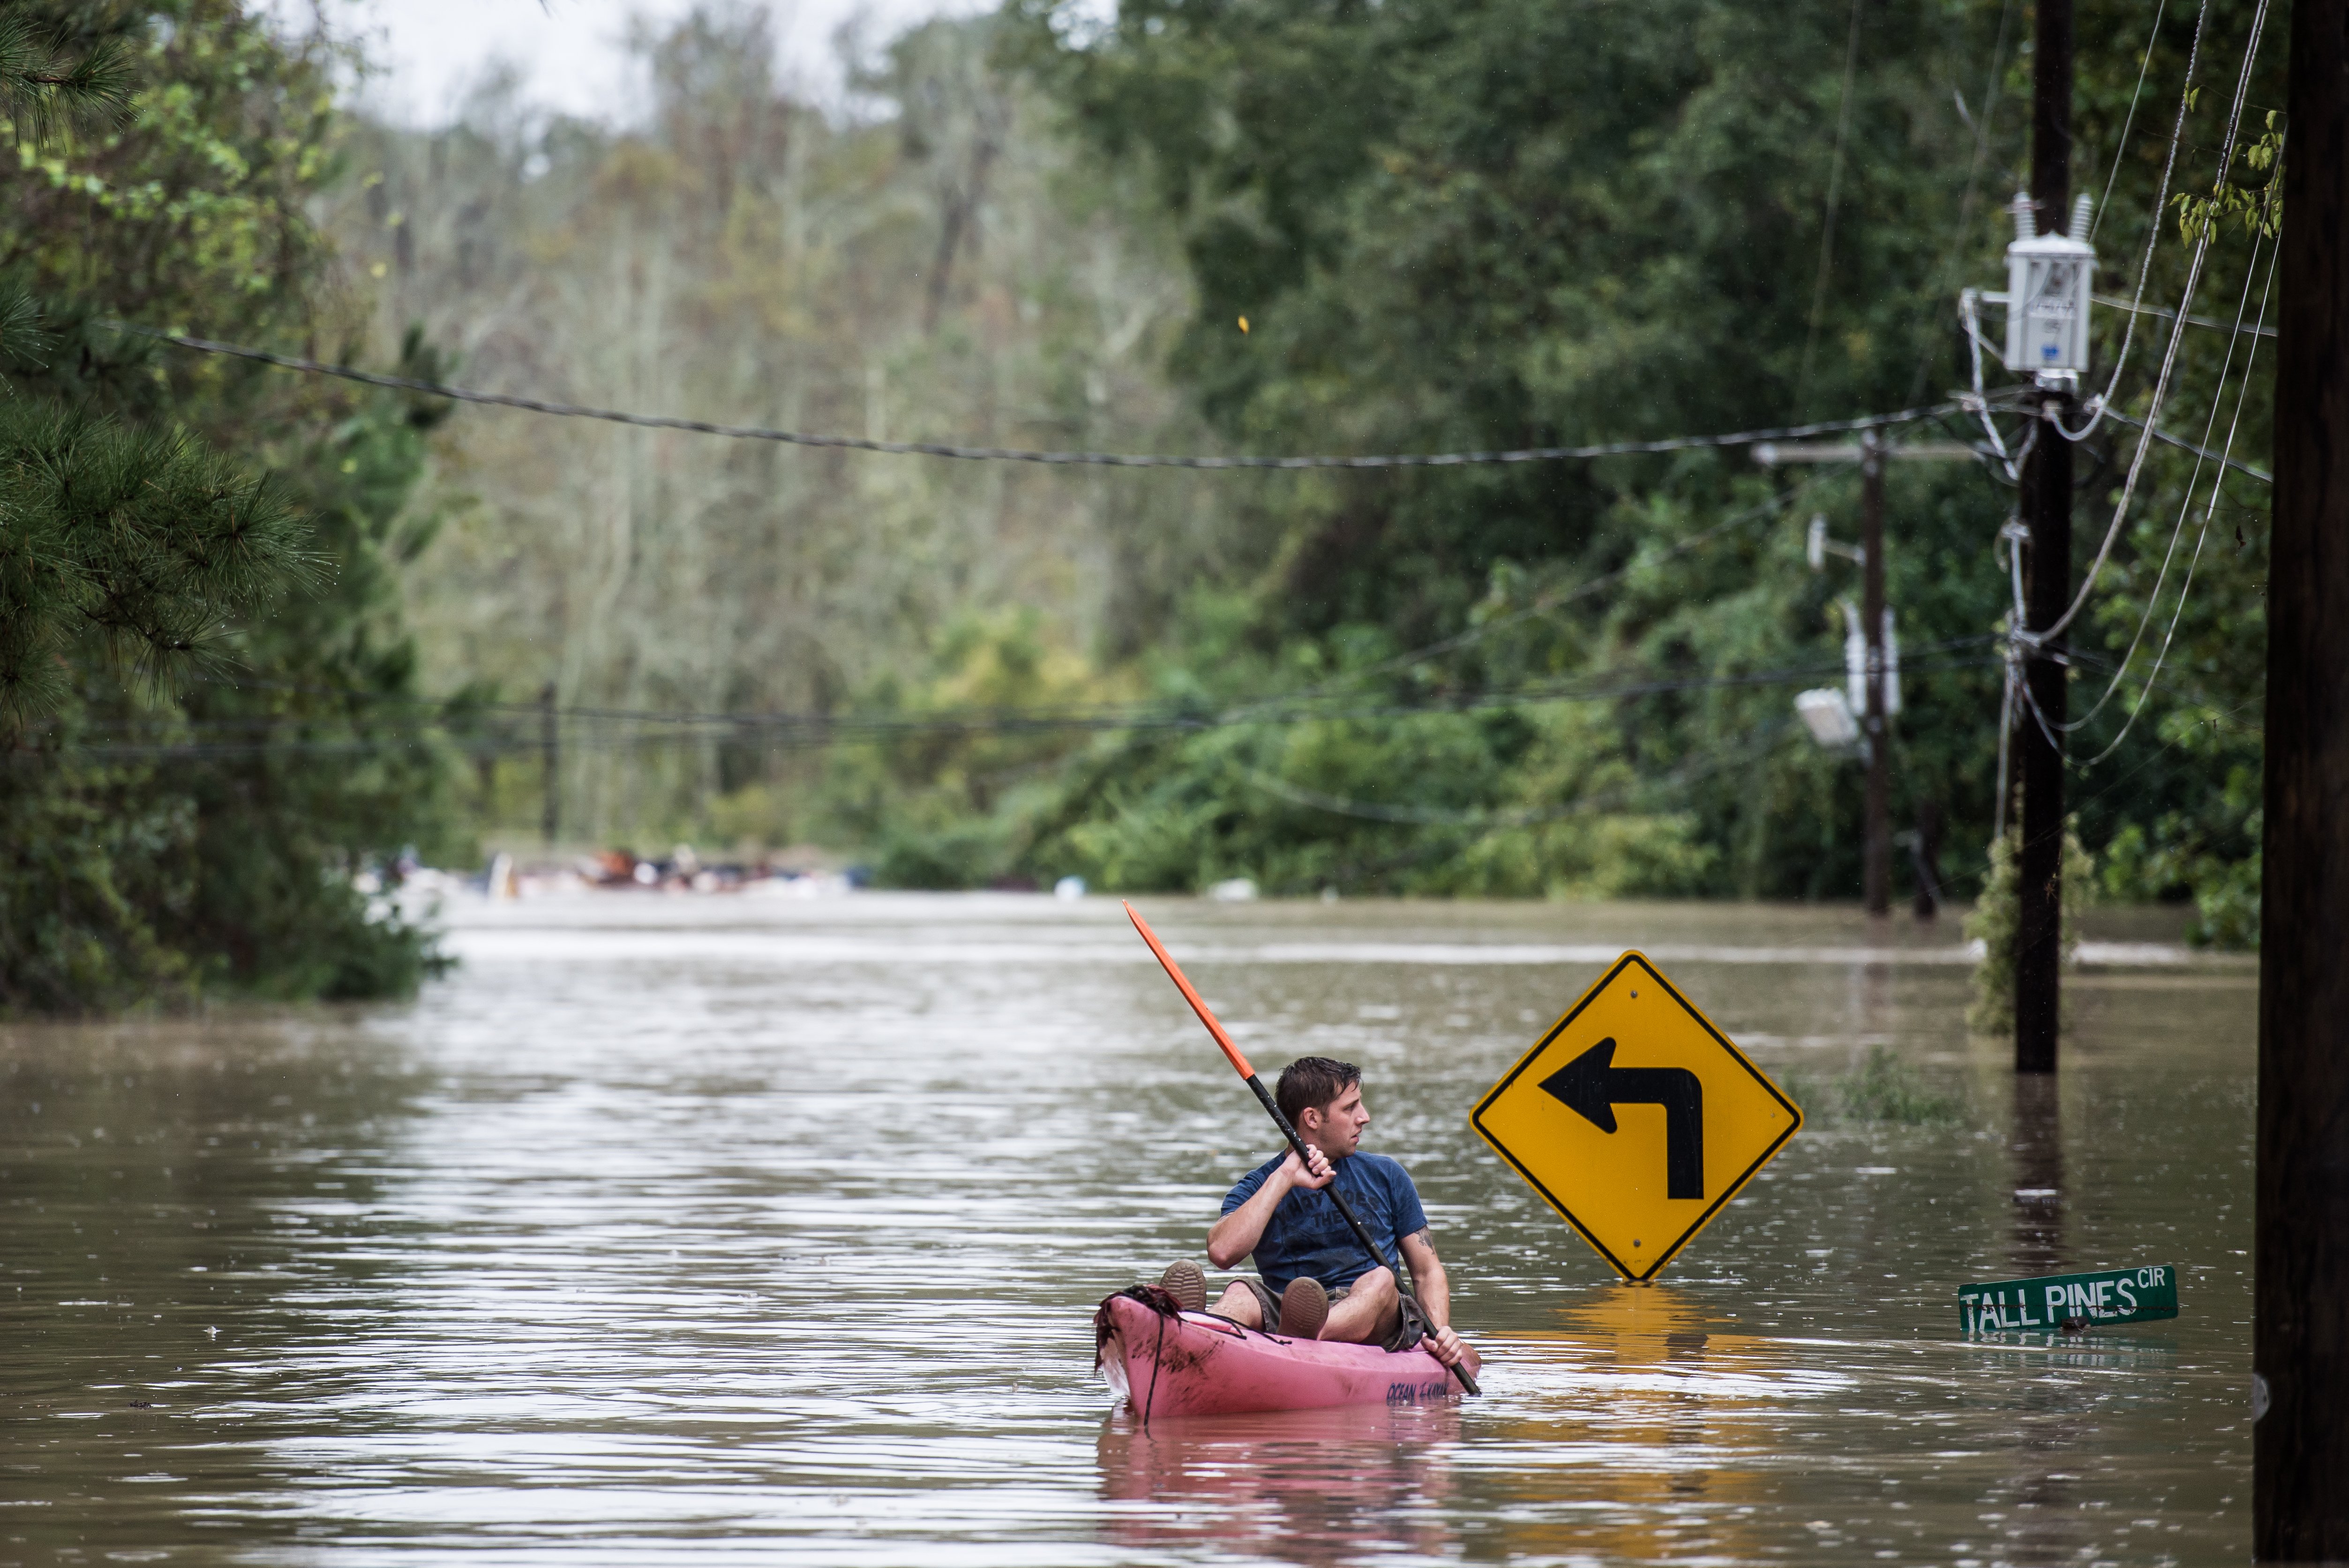 A man kayaking on Tall Pines Circle in Columbia, South Carolina on October 4, 2015. photo: paul fayfield/getty images